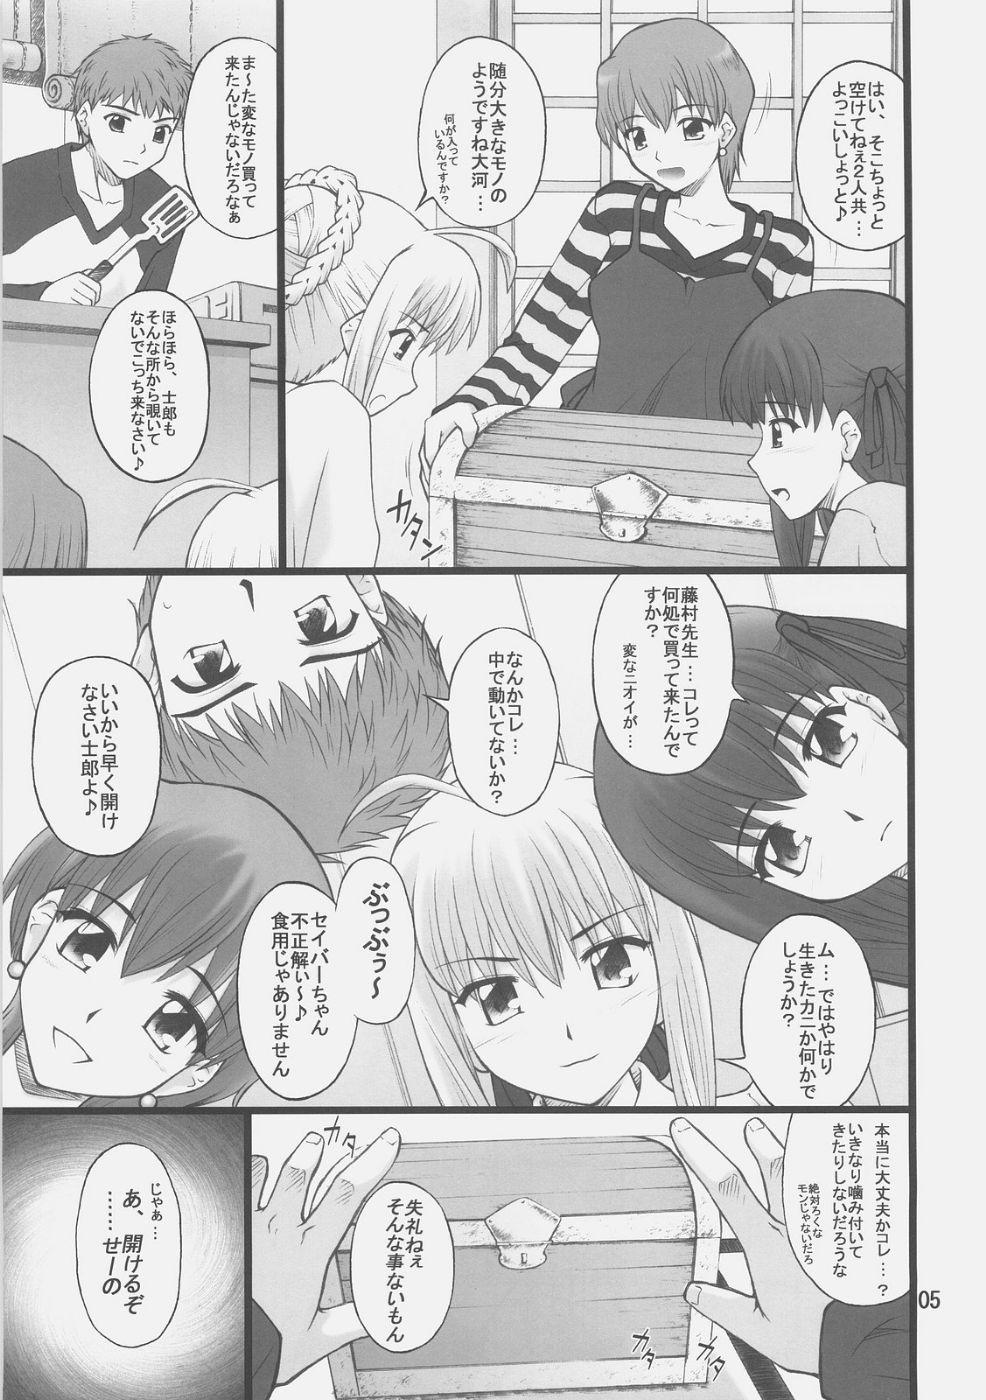 Bokep Grem-Rin 1 - Fate stay night Indonesian - Page 4